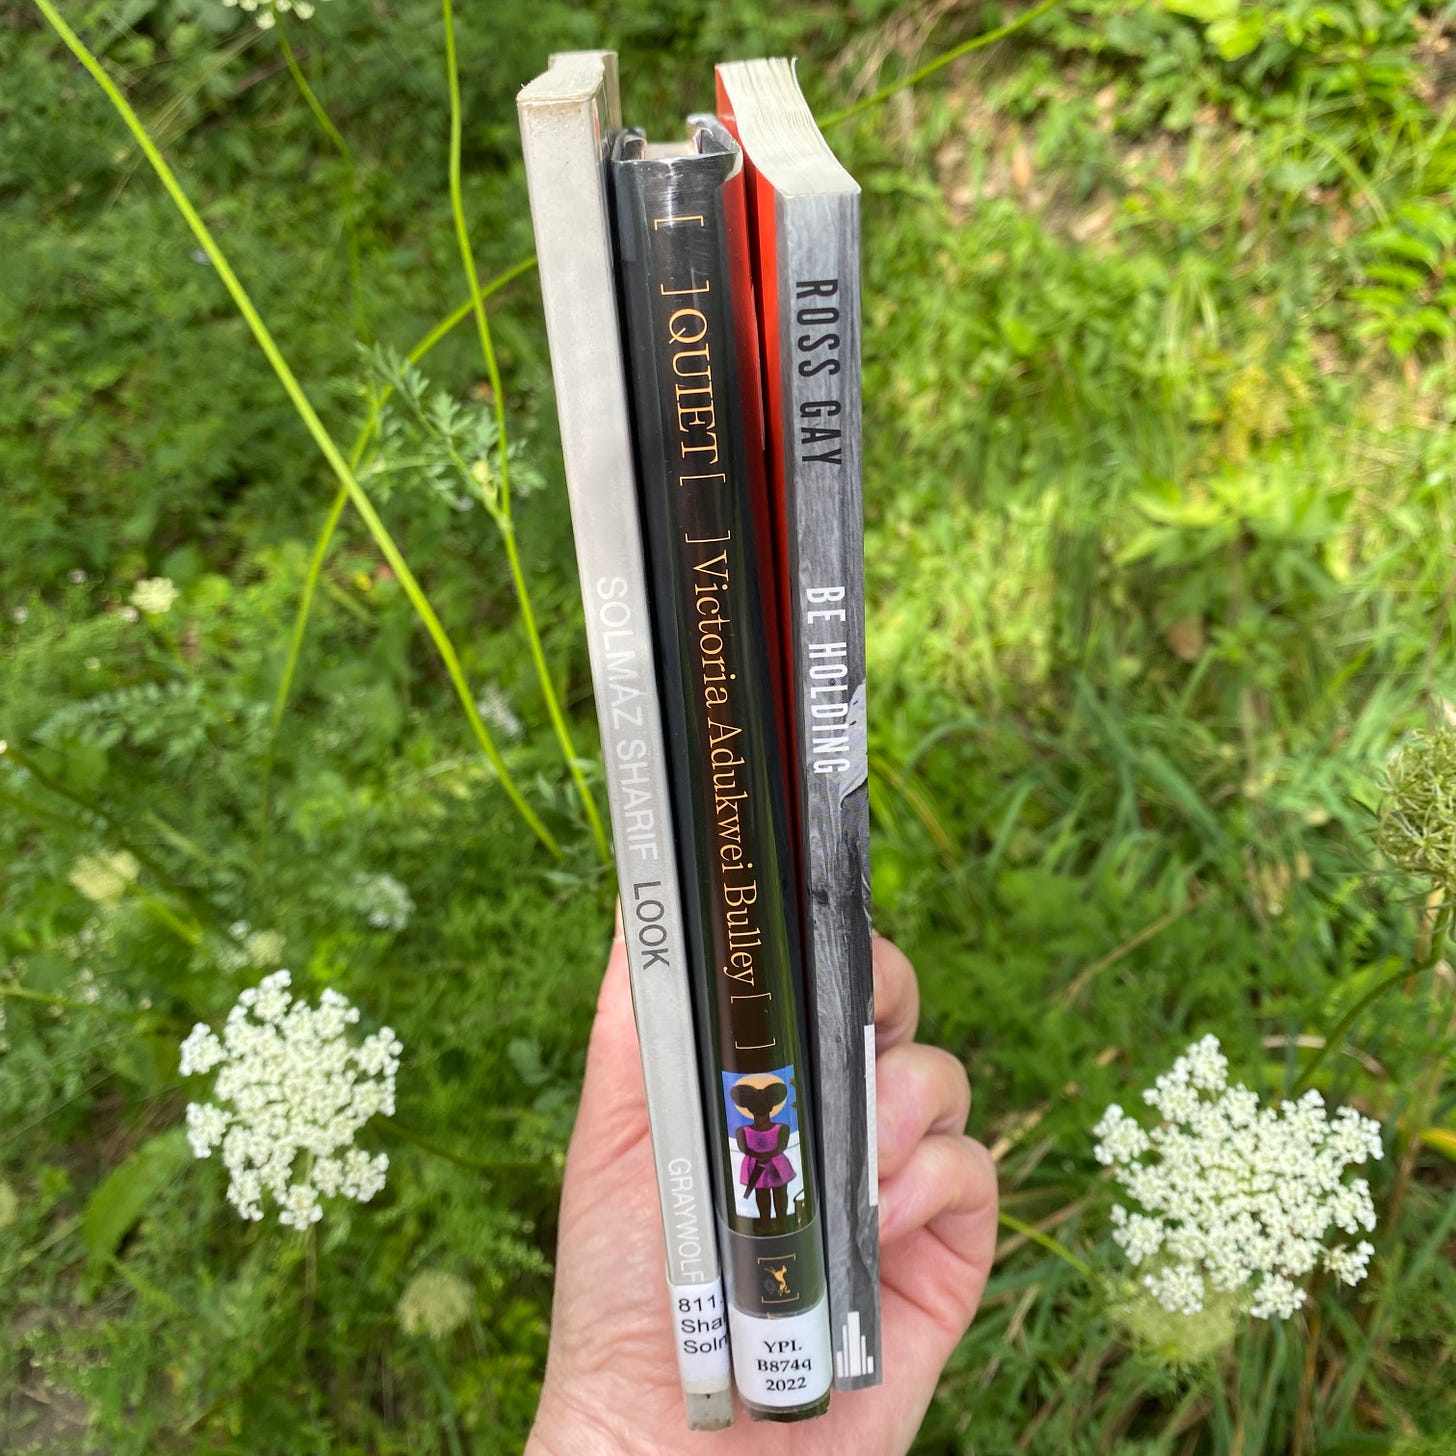 I am holding three poetry collections in one hand, spines facing out, between two stalks of Queen Anne’s Lace in a grassy field.